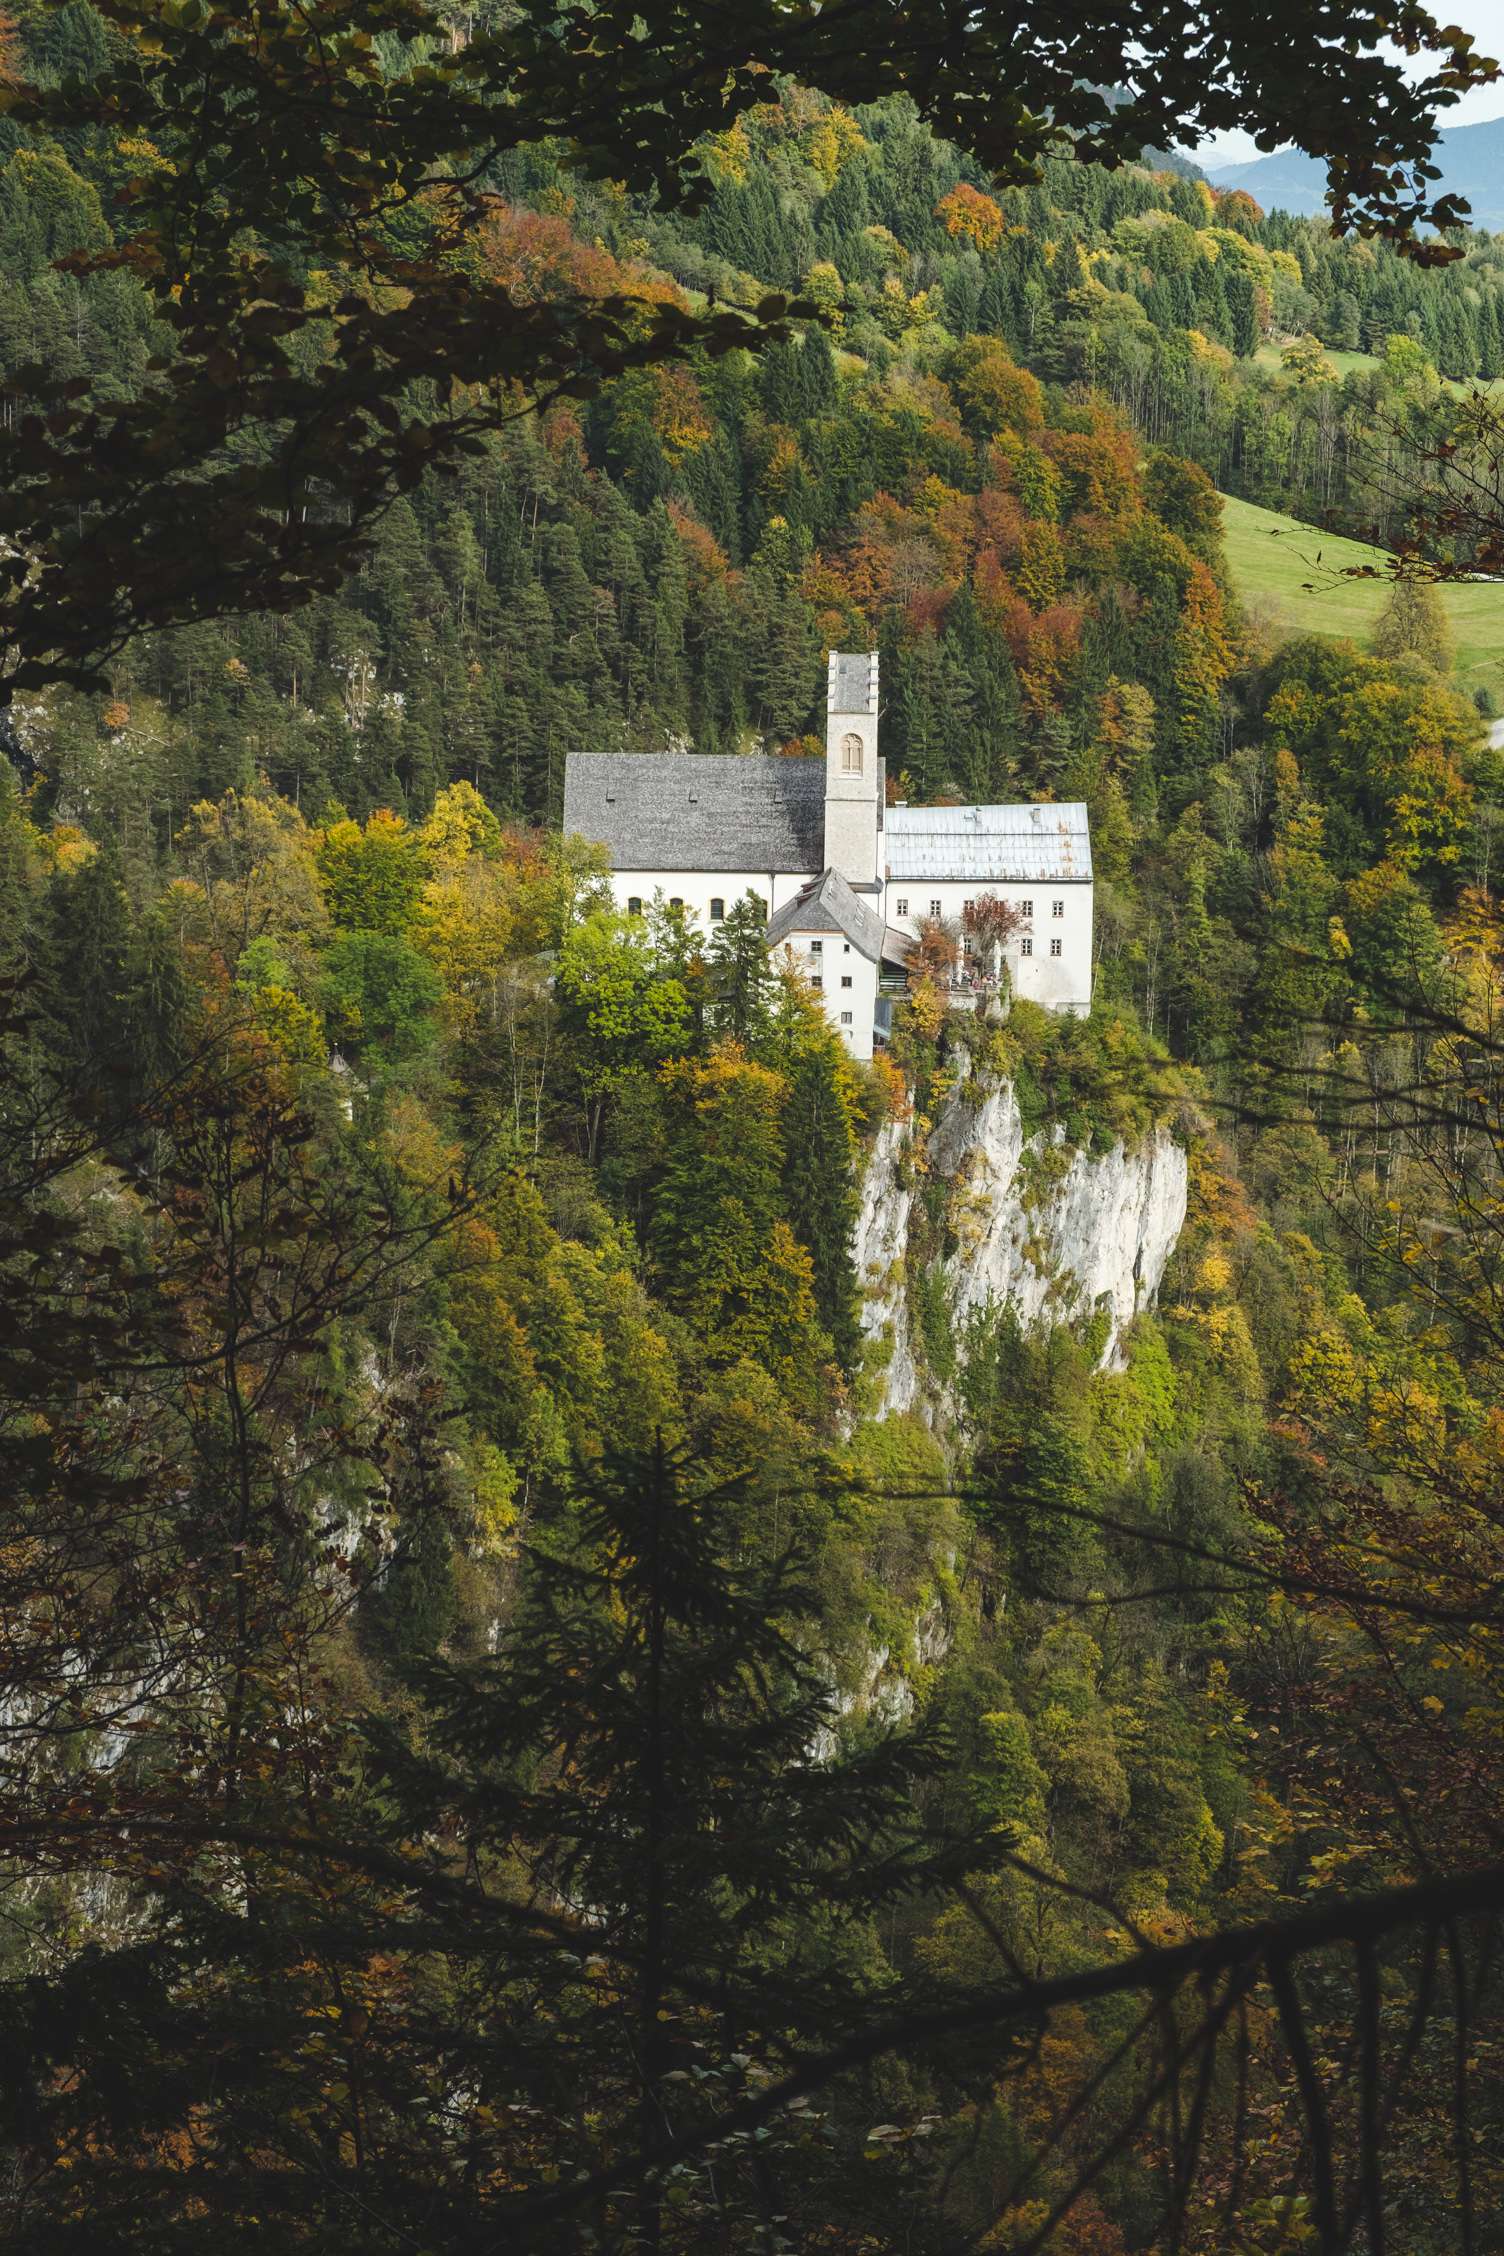 St. Georgenberg monastery. A monastery perched on a rock surrounded by autumn forest